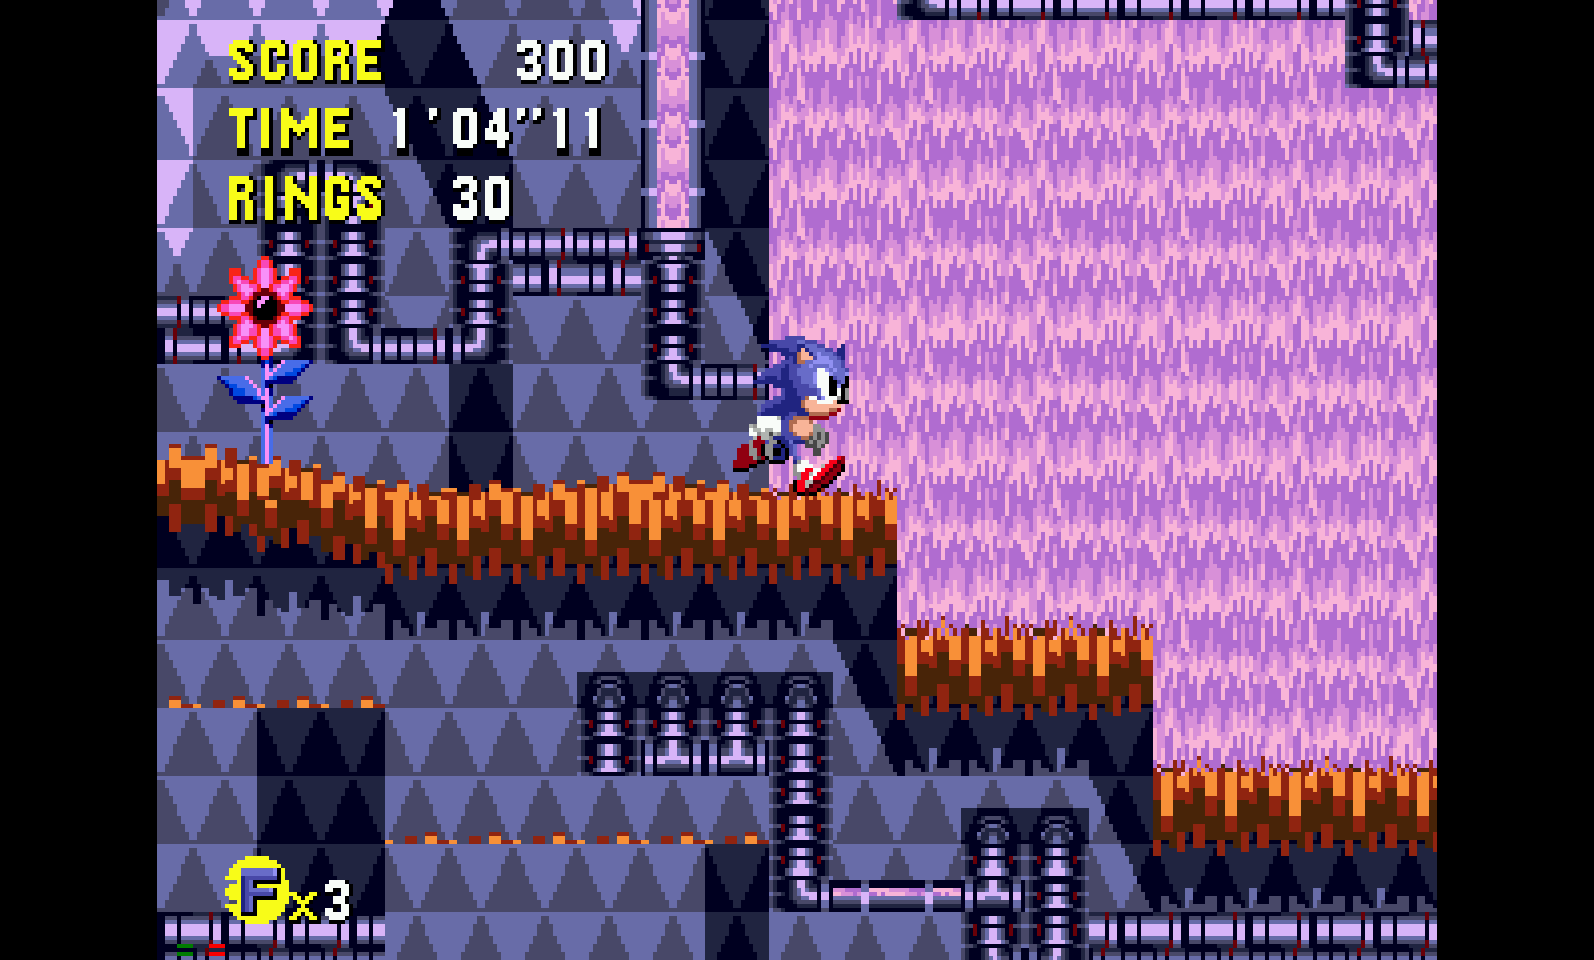 The time travel aspect of Sonic CD was great, if a bit awkward when you triggered it accidentally.  (Screenshot: Sega / MobyGames)